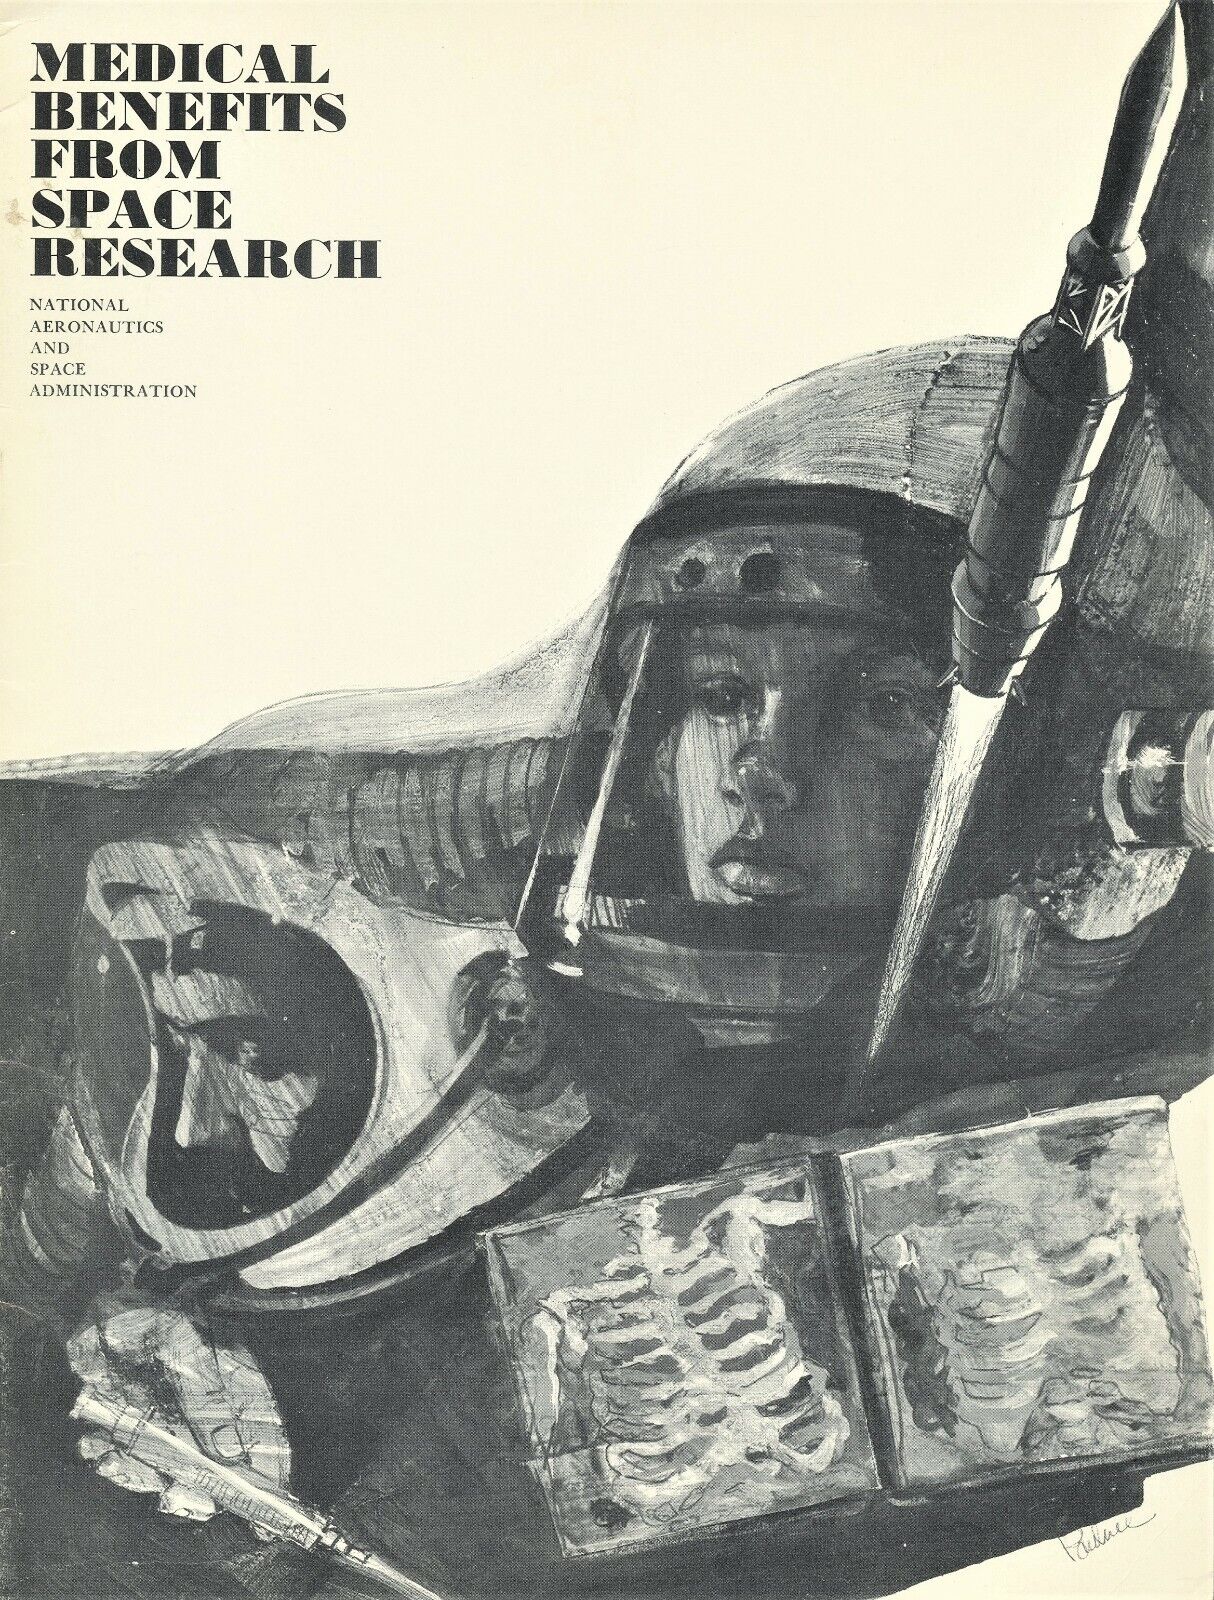 Vintage NASA Report: Medical Benefits from Space Research